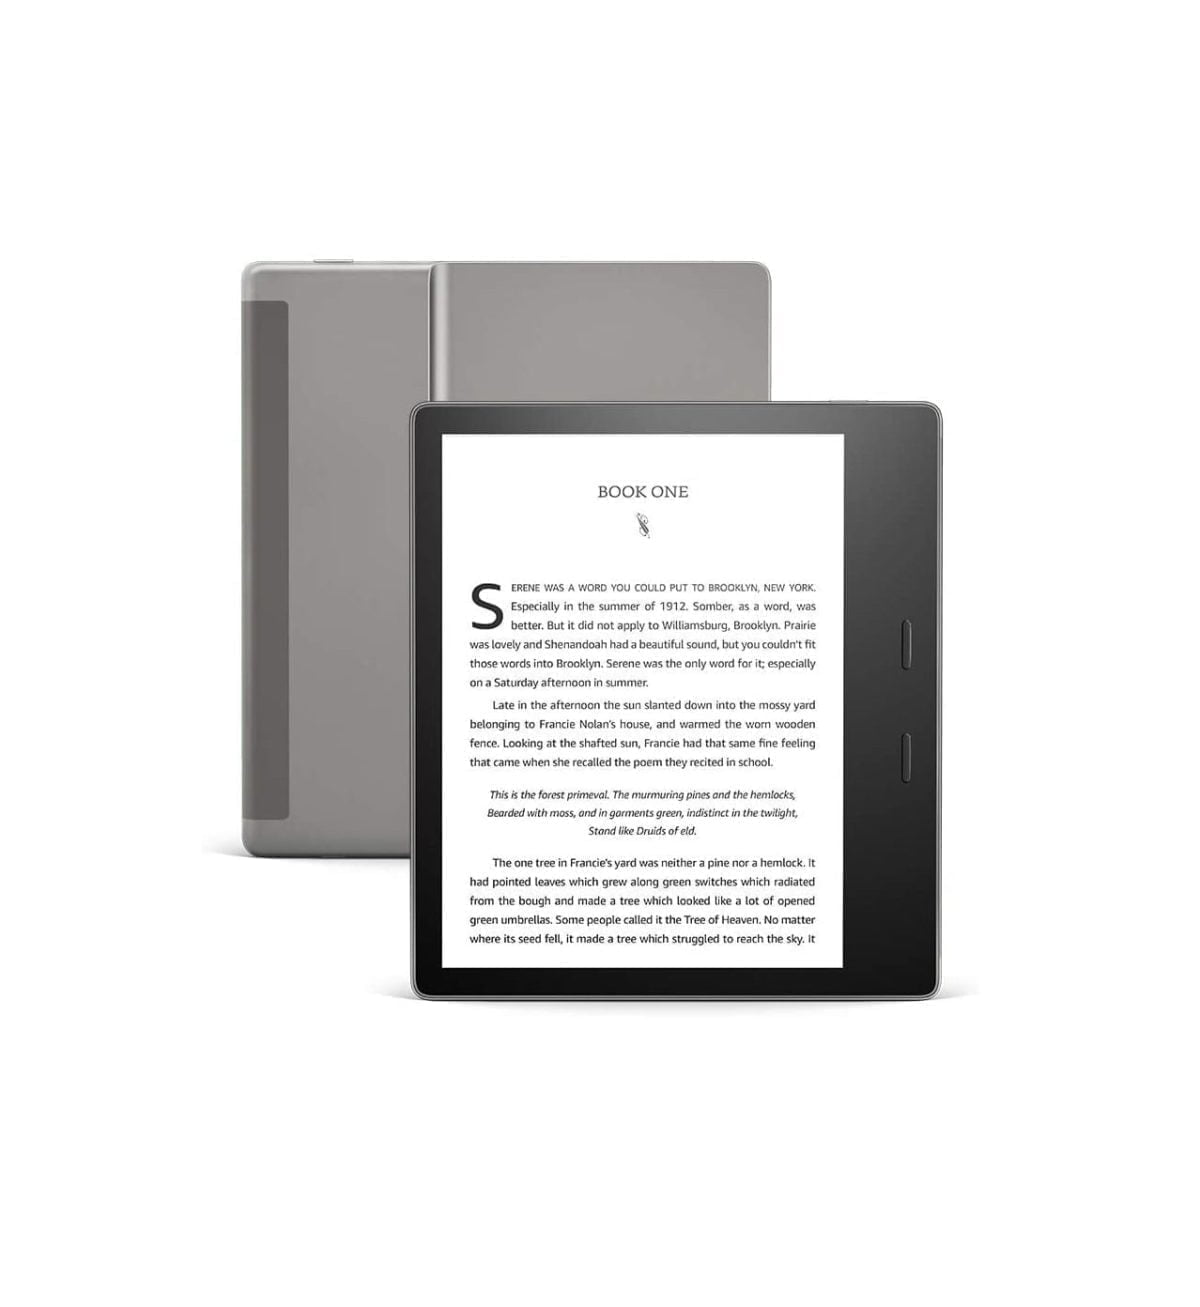 61Hhewtb Rl. Ac Sl1000 Amazon &Amp;Lt;H1&Amp;Gt;All-New Kindle Oasis (10Th Gen), Now With Adjustable Warm Light, 7&Amp;Quot; Display, Waterproof, 8 Gb, Wi-Fi, Graphite&Amp;Lt;/H1&Amp;Gt; &Amp;Lt;Ul Class=&Amp;Quot;A-Unordered-List A-Vertical A-Spacing-Mini&Amp;Quot;&Amp;Gt; &Amp;Lt;Li&Amp;Gt;&Amp;Lt;Span Class=&Amp;Quot;A-List-Item&Amp;Quot;&Amp;Gt;Amazon Largest, Highest Resolution Display— 7” And 300 Ppi, Glare-Free.&Amp;Lt;/Span&Amp;Gt;&Amp;Lt;/Li&Amp;Gt; &Amp;Lt;Li&Amp;Gt;&Amp;Lt;Span Class=&Amp;Quot;A-List-Item&Amp;Quot;&Amp;Gt;Adjustable Warm Light To Shift Screen Shade From White To Amber.&Amp;Lt;/Span&Amp;Gt;&Amp;Lt;/Li&Amp;Gt; &Amp;Lt;Li&Amp;Gt;&Amp;Lt;Span Class=&Amp;Quot;A-List-Item&Amp;Quot;&Amp;Gt;Waterproof (Ipx8) So You Can Read In The Bath Or By The Pool.&Amp;Lt;/Span&Amp;Gt;&Amp;Lt;/Li&Amp;Gt; &Amp;Lt;Li&Amp;Gt;&Amp;Lt;Span Class=&Amp;Quot;A-List-Item&Amp;Quot;&Amp;Gt;Thin And Light Ergonomic Design With Dedicated Page Turn Buttons.&Amp;Lt;/Span&Amp;Gt;&Amp;Lt;/Li&Amp;Gt; &Amp;Lt;Li&Amp;Gt;&Amp;Lt;Span Class=&Amp;Quot;A-List-Item&Amp;Quot;&Amp;Gt;Reads Like Real Paper With The Latest E-Ink Technology For Fast Page Turns.&Amp;Lt;/Span&Amp;Gt;&Amp;Lt;/Li&Amp;Gt; &Amp;Lt;Li&Amp;Gt;&Amp;Lt;Span Class=&Amp;Quot;A-List-Item&Amp;Quot;&Amp;Gt;Keep Reading - A Single Charge Lasts Weeks, Not Hours.&Amp;Lt;/Span&Amp;Gt;&Amp;Lt;/Li&Amp;Gt; &Amp;Lt;Li&Amp;Gt;&Amp;Lt;Span Class=&Amp;Quot;A-List-Item&Amp;Quot;&Amp;Gt;Browse Over 1 Million Ebooks In The Kindle Store On Amazon Us, Including Thousands Of Arabic Titles.&Amp;Lt;/Span&Amp;Gt;&Amp;Lt;/Li&Amp;Gt; &Amp;Lt;/Ul&Amp;Gt; Kindle Oasis All-New Kindle Oasis (10Th Gen), Now With Adjustable Warm Light, 7&Amp;Quot; Display, Waterproof, 8 Gb, Wi-Fi, Graphite